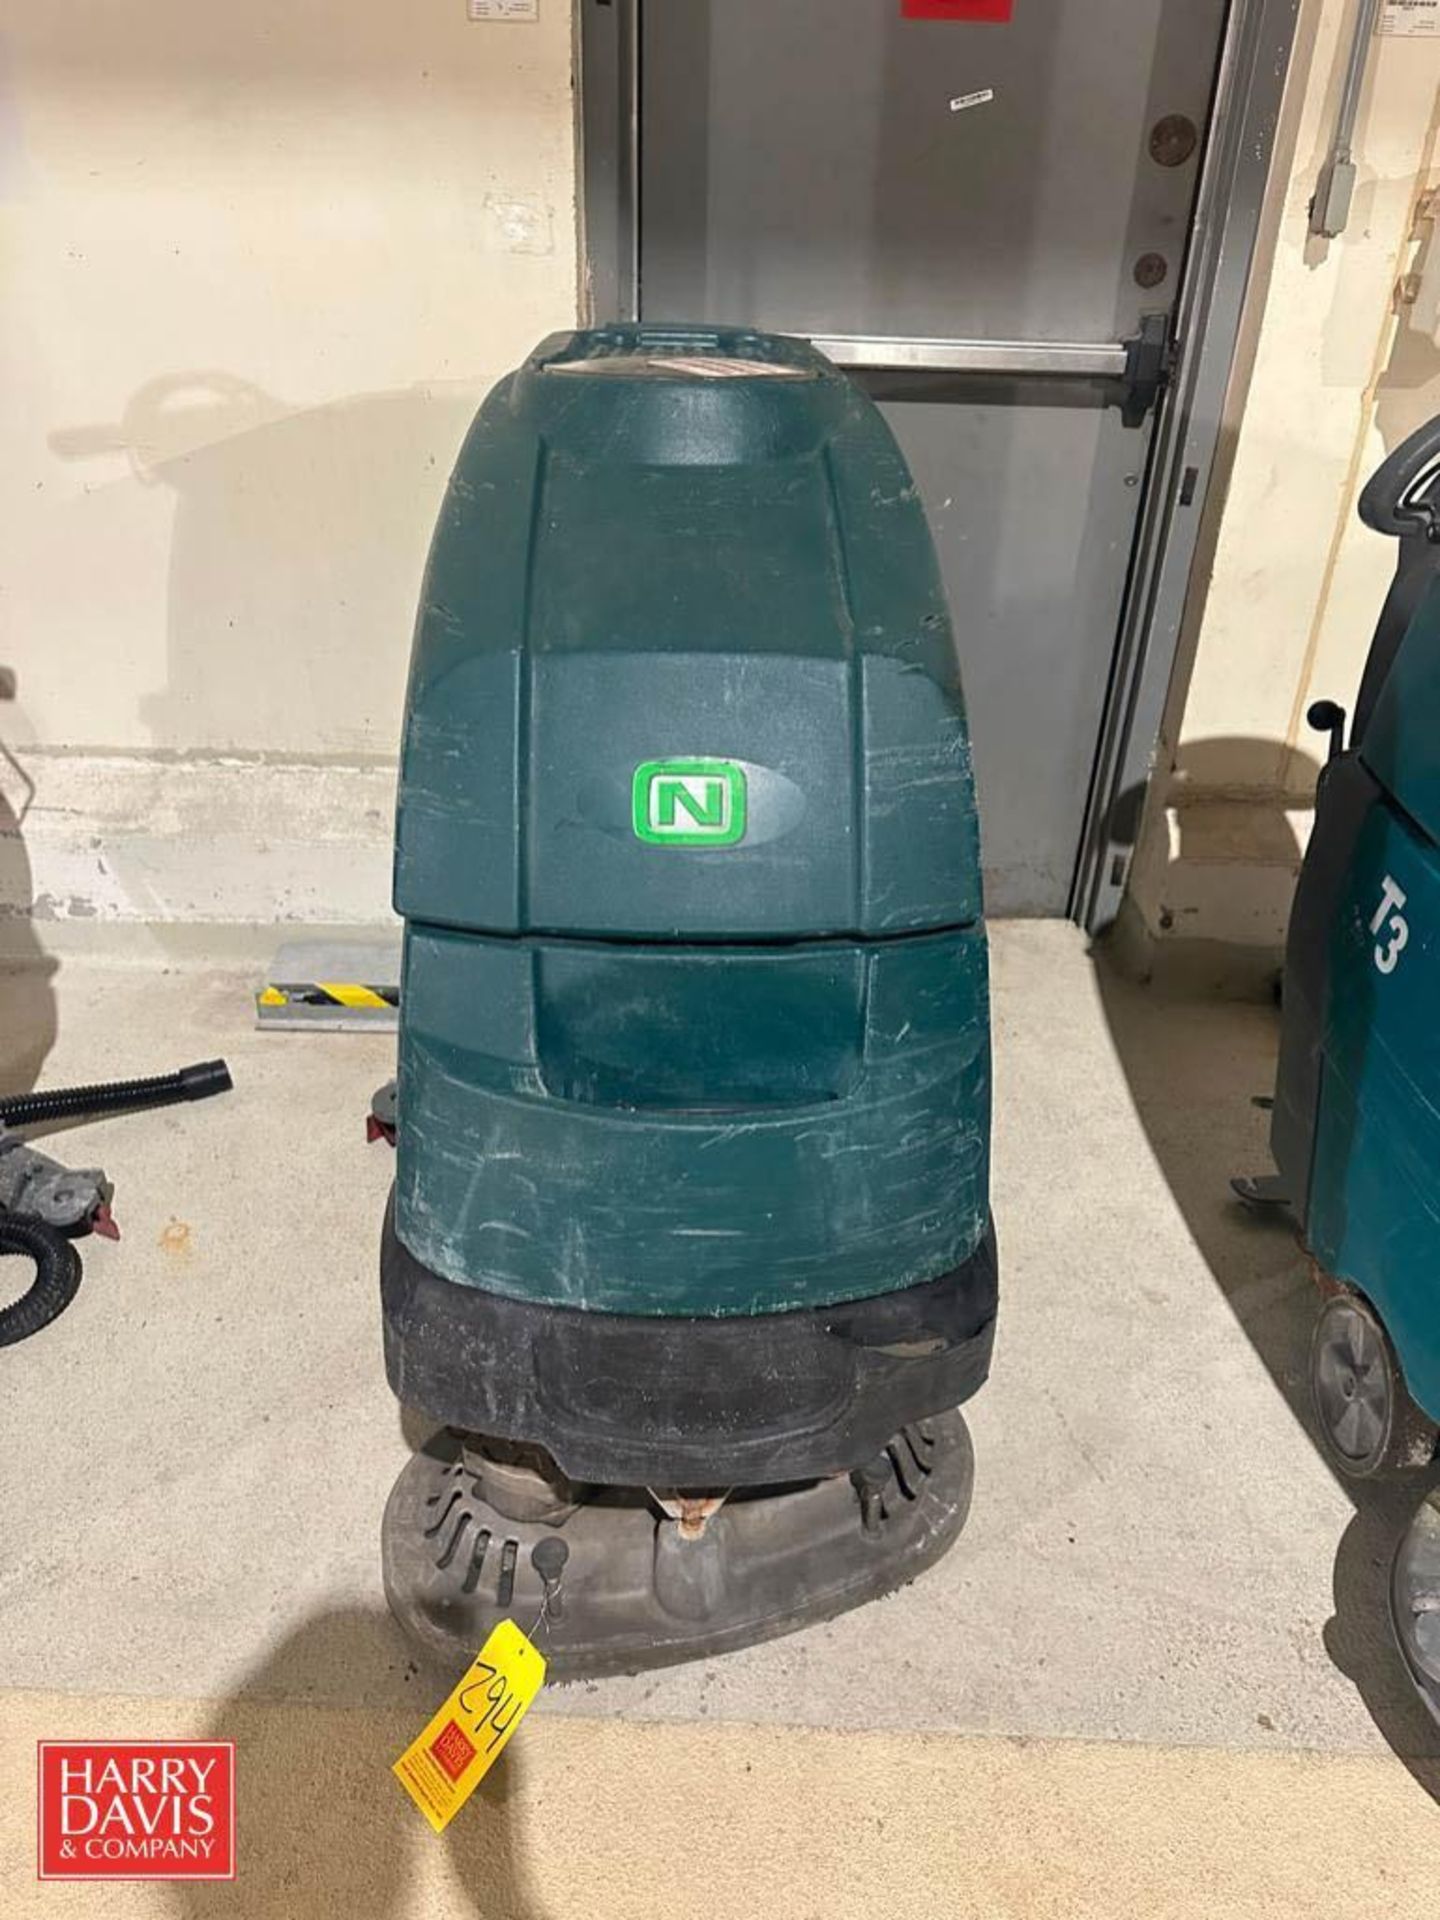 2011 Nobles Speed Scrub Walk Behind Floor Scrubber, Model: HFZ-V4-TN24.20, S/N: 715648 with Charger